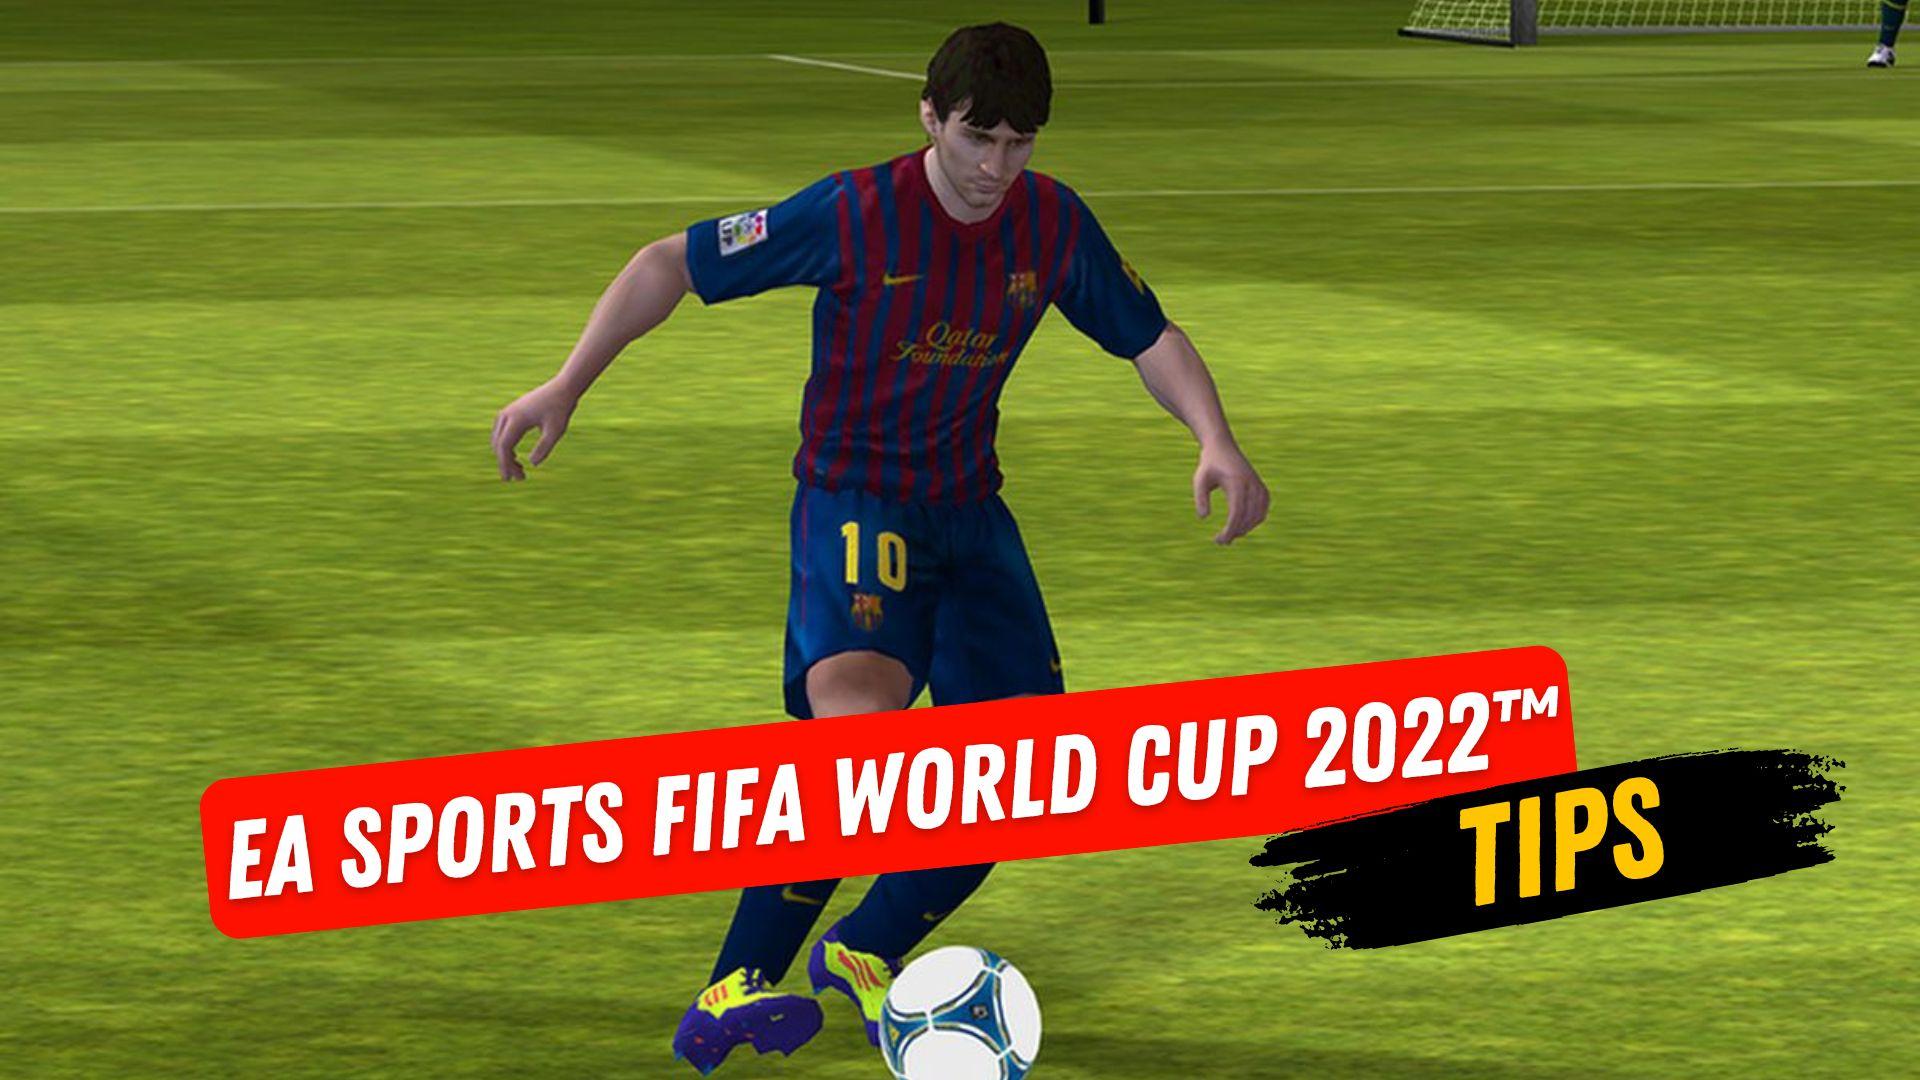 EA SPORTS FC MOBILE 24 SOCCER Beginner Guide – Tips and Tricks to